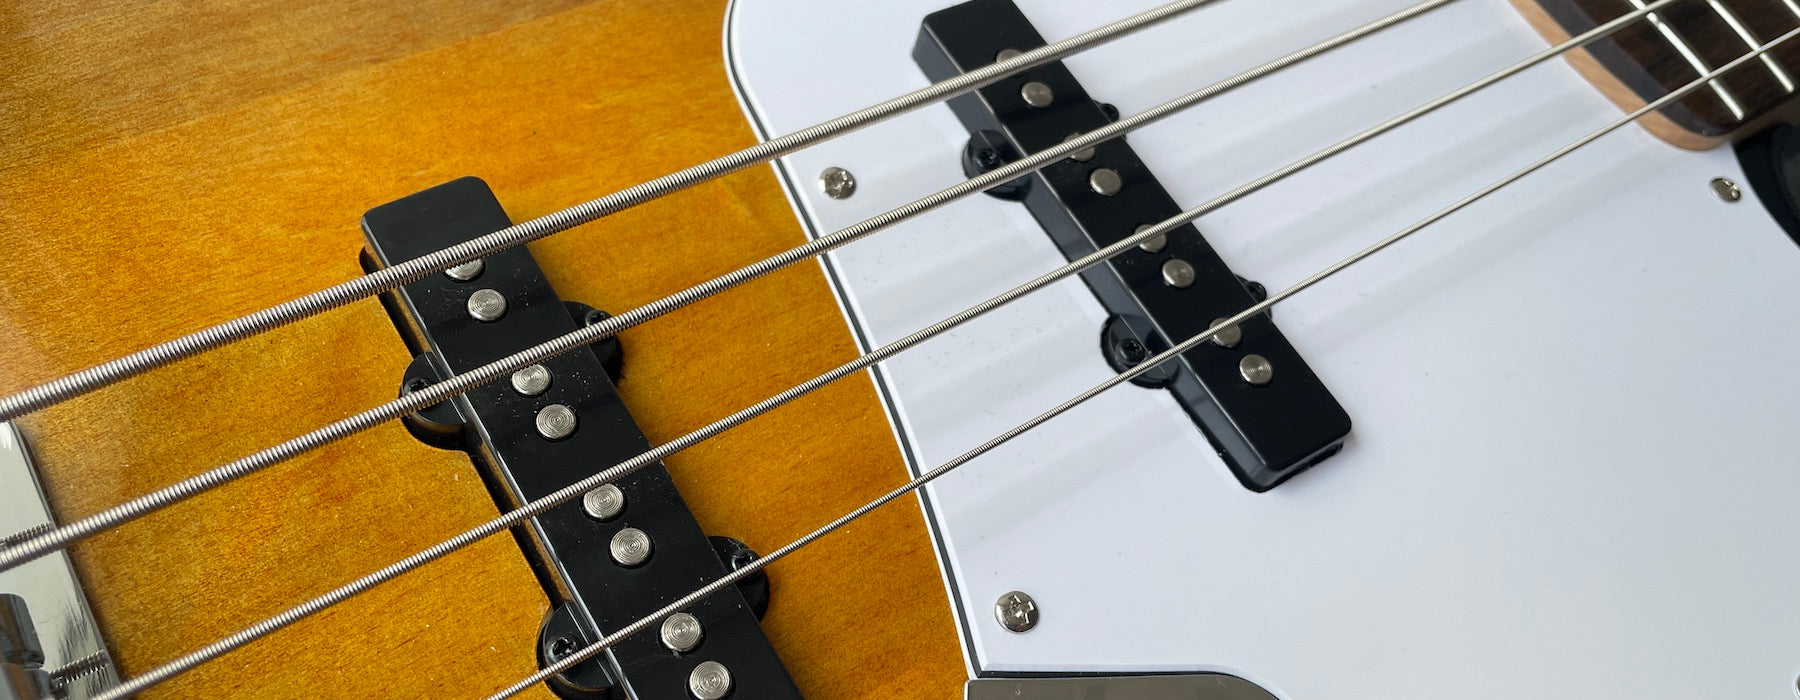 Jazz Bass Pickups on a Fender Squire showing part of pickguard